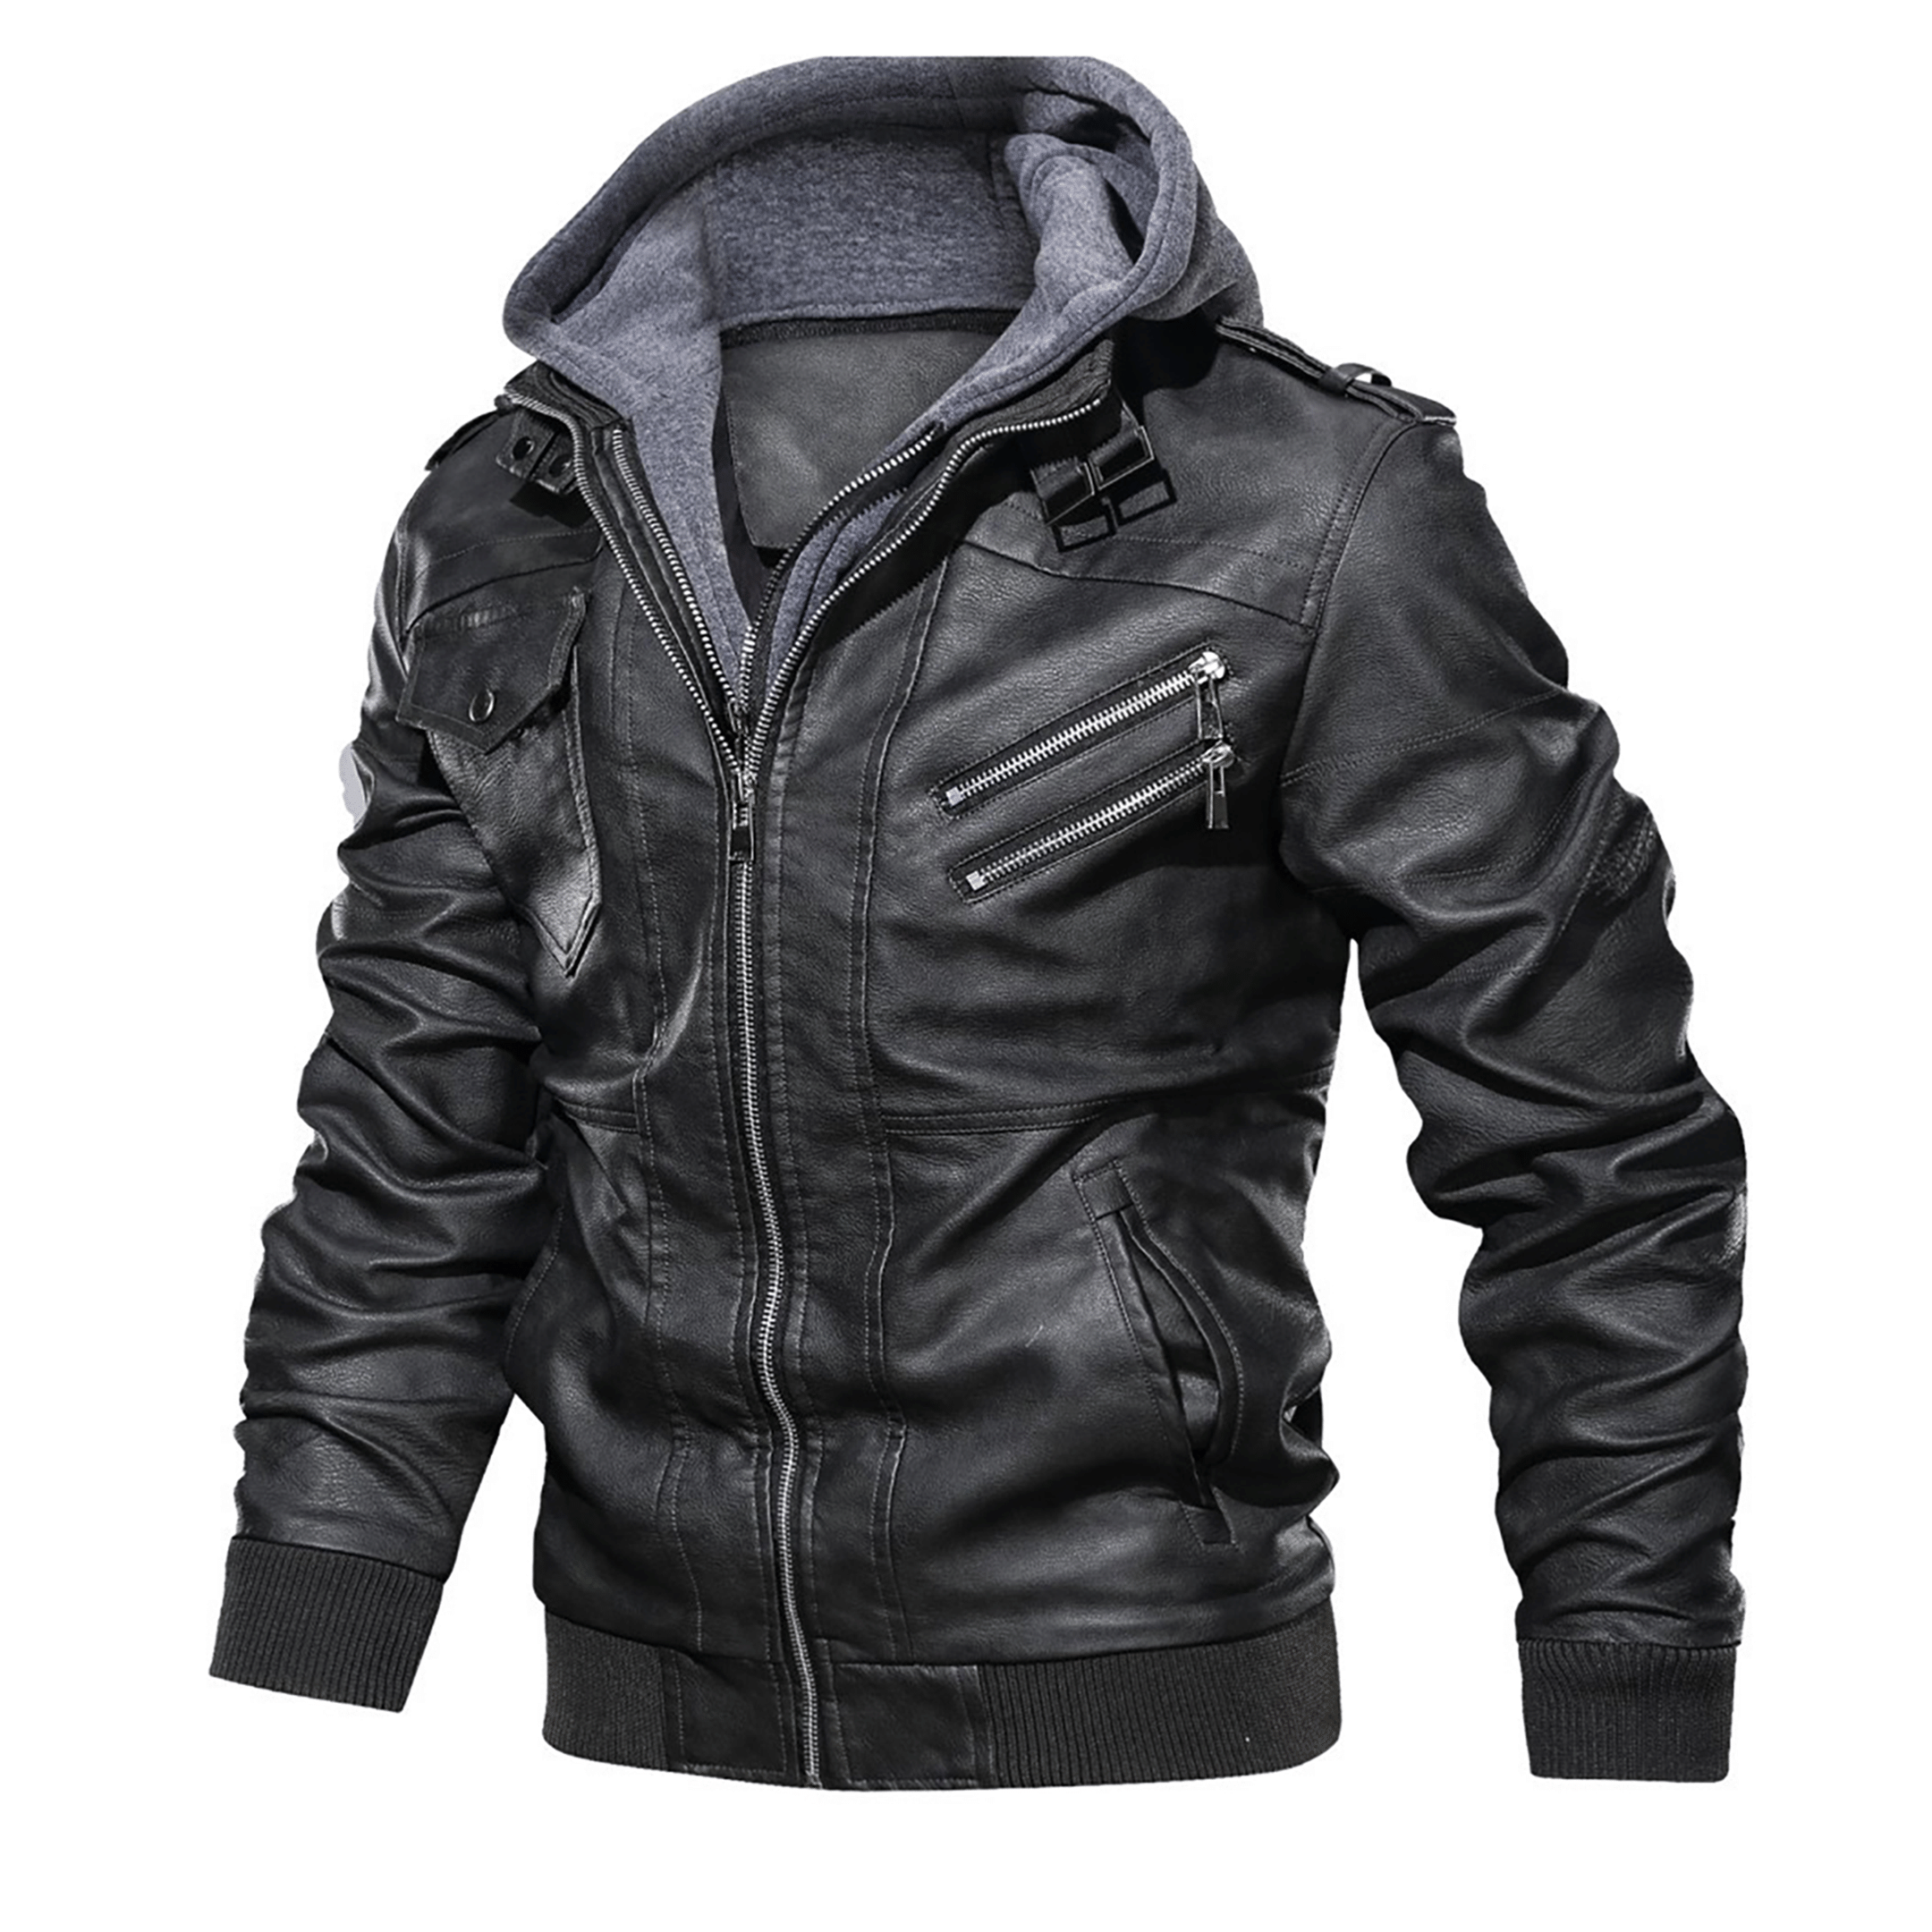 Top leather jackets and latest products 145